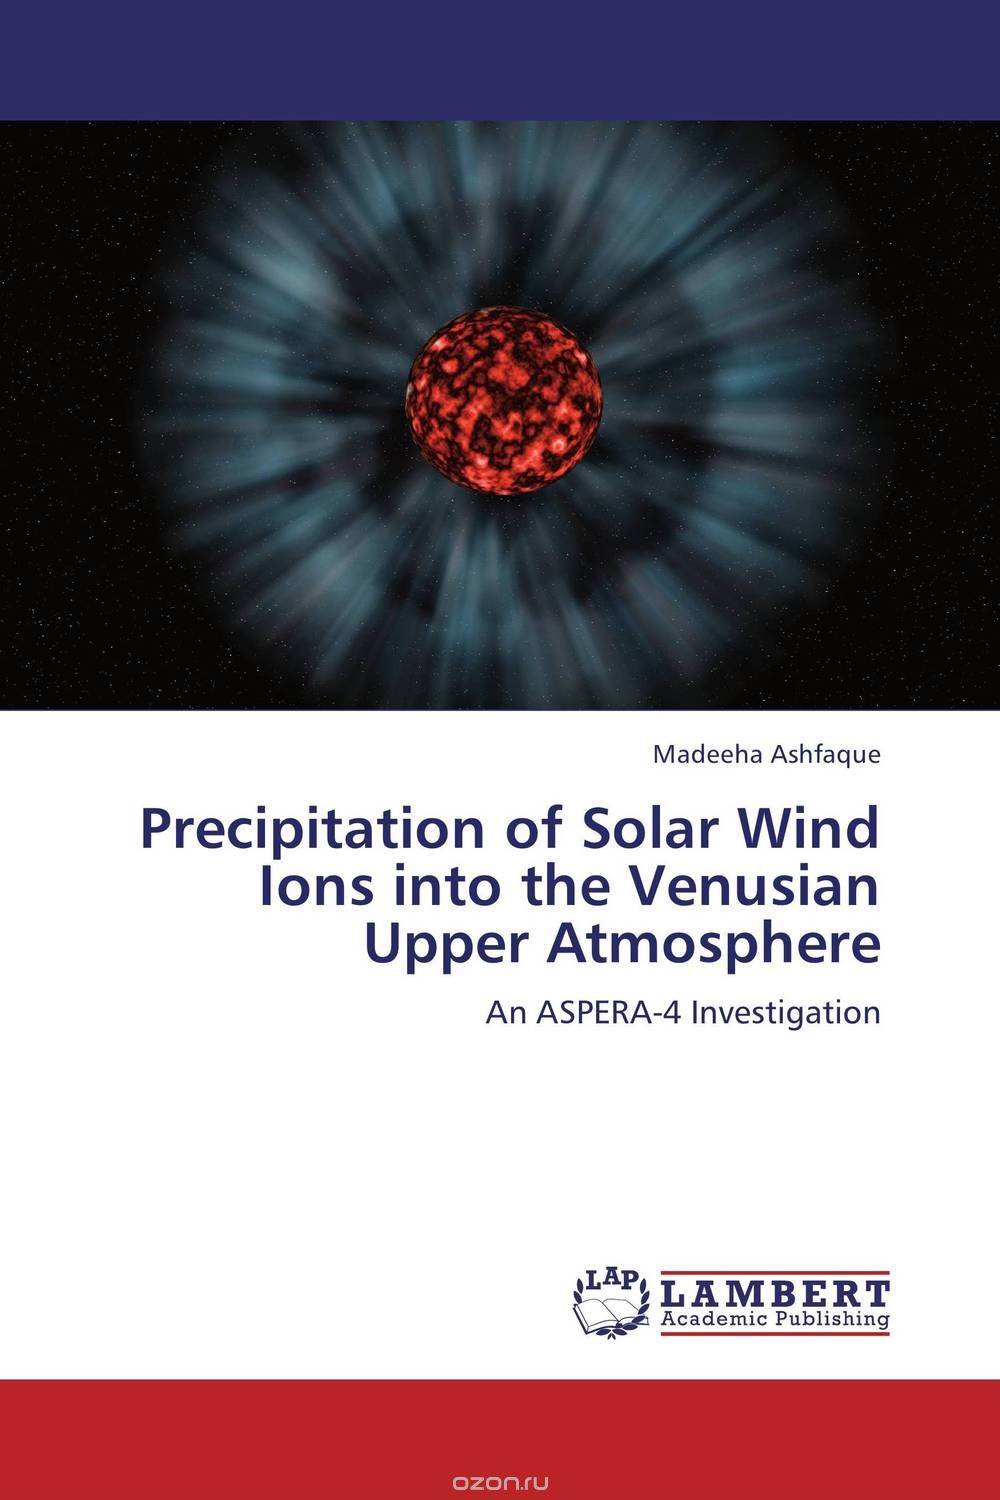 Precipitation of Solar Wind Ions into the Venusian Upper Atmosphere